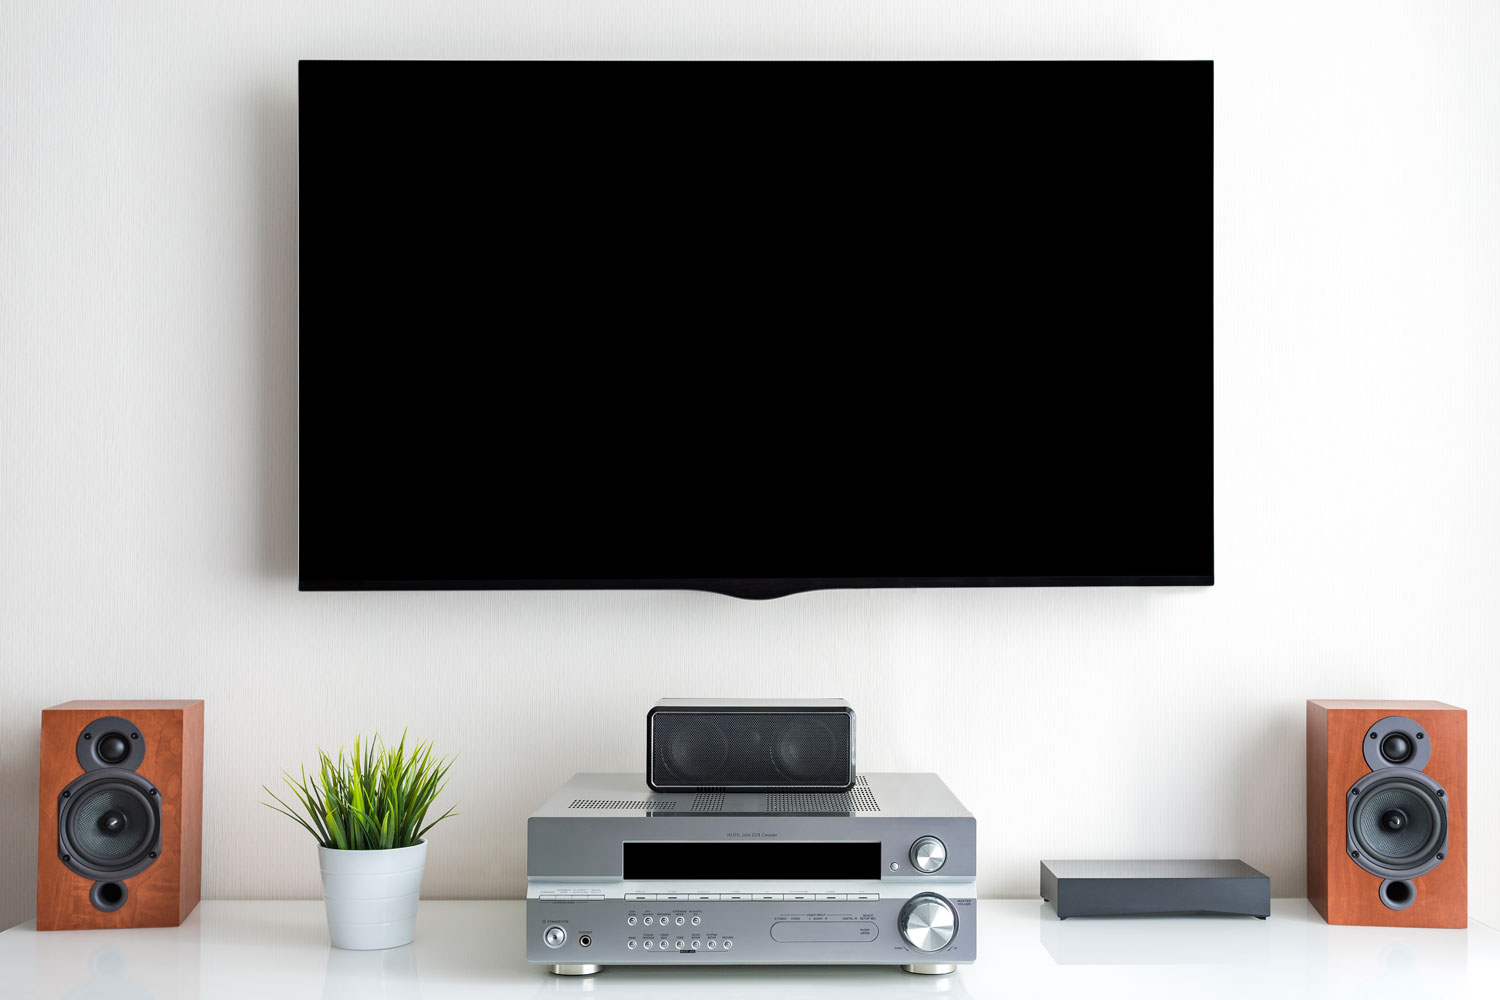 A wide screen TV with wooden speakers